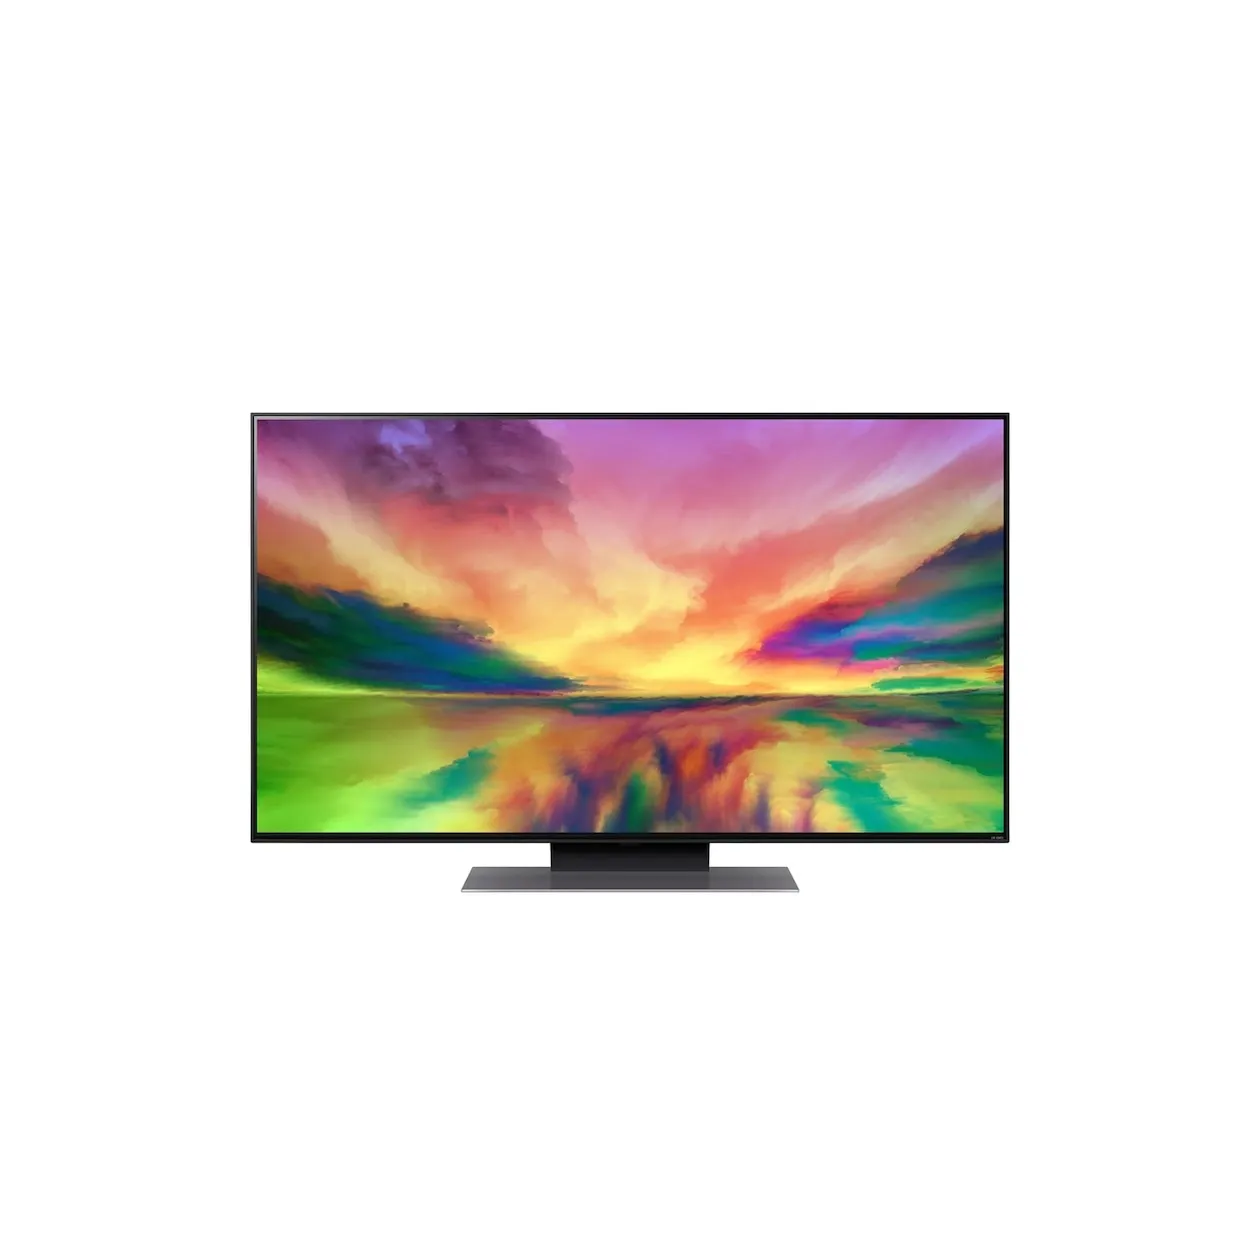 LG 50QNED826RE (2023)